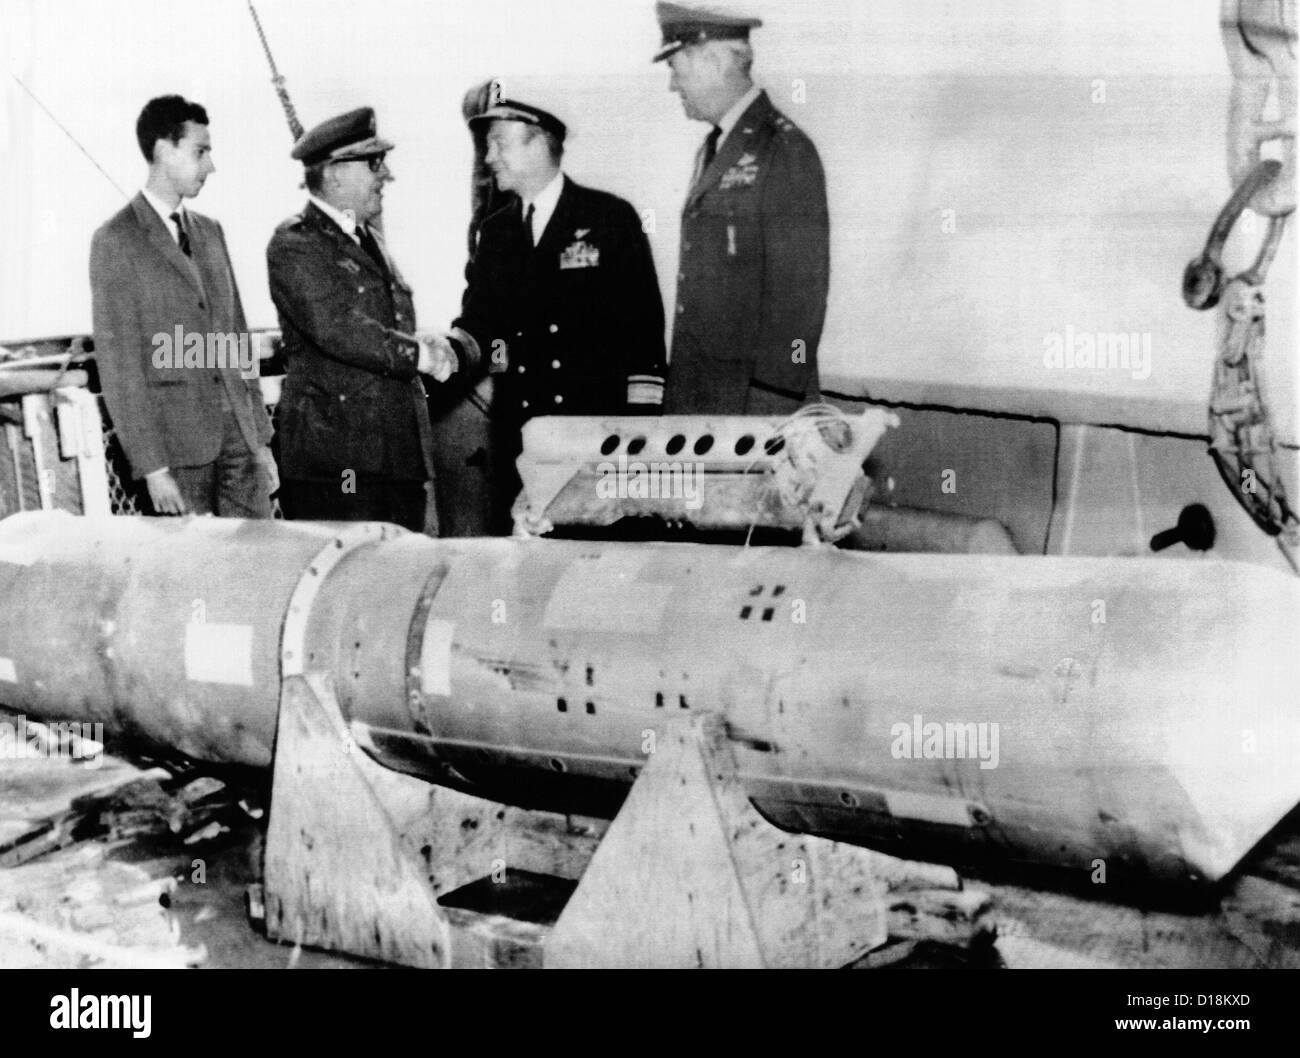 Lost H-bomb recovered off Palomares, Spain. It was lost when a American B-52 carrying 4 H-bombs broke up over the Mediterranean Stock Photo